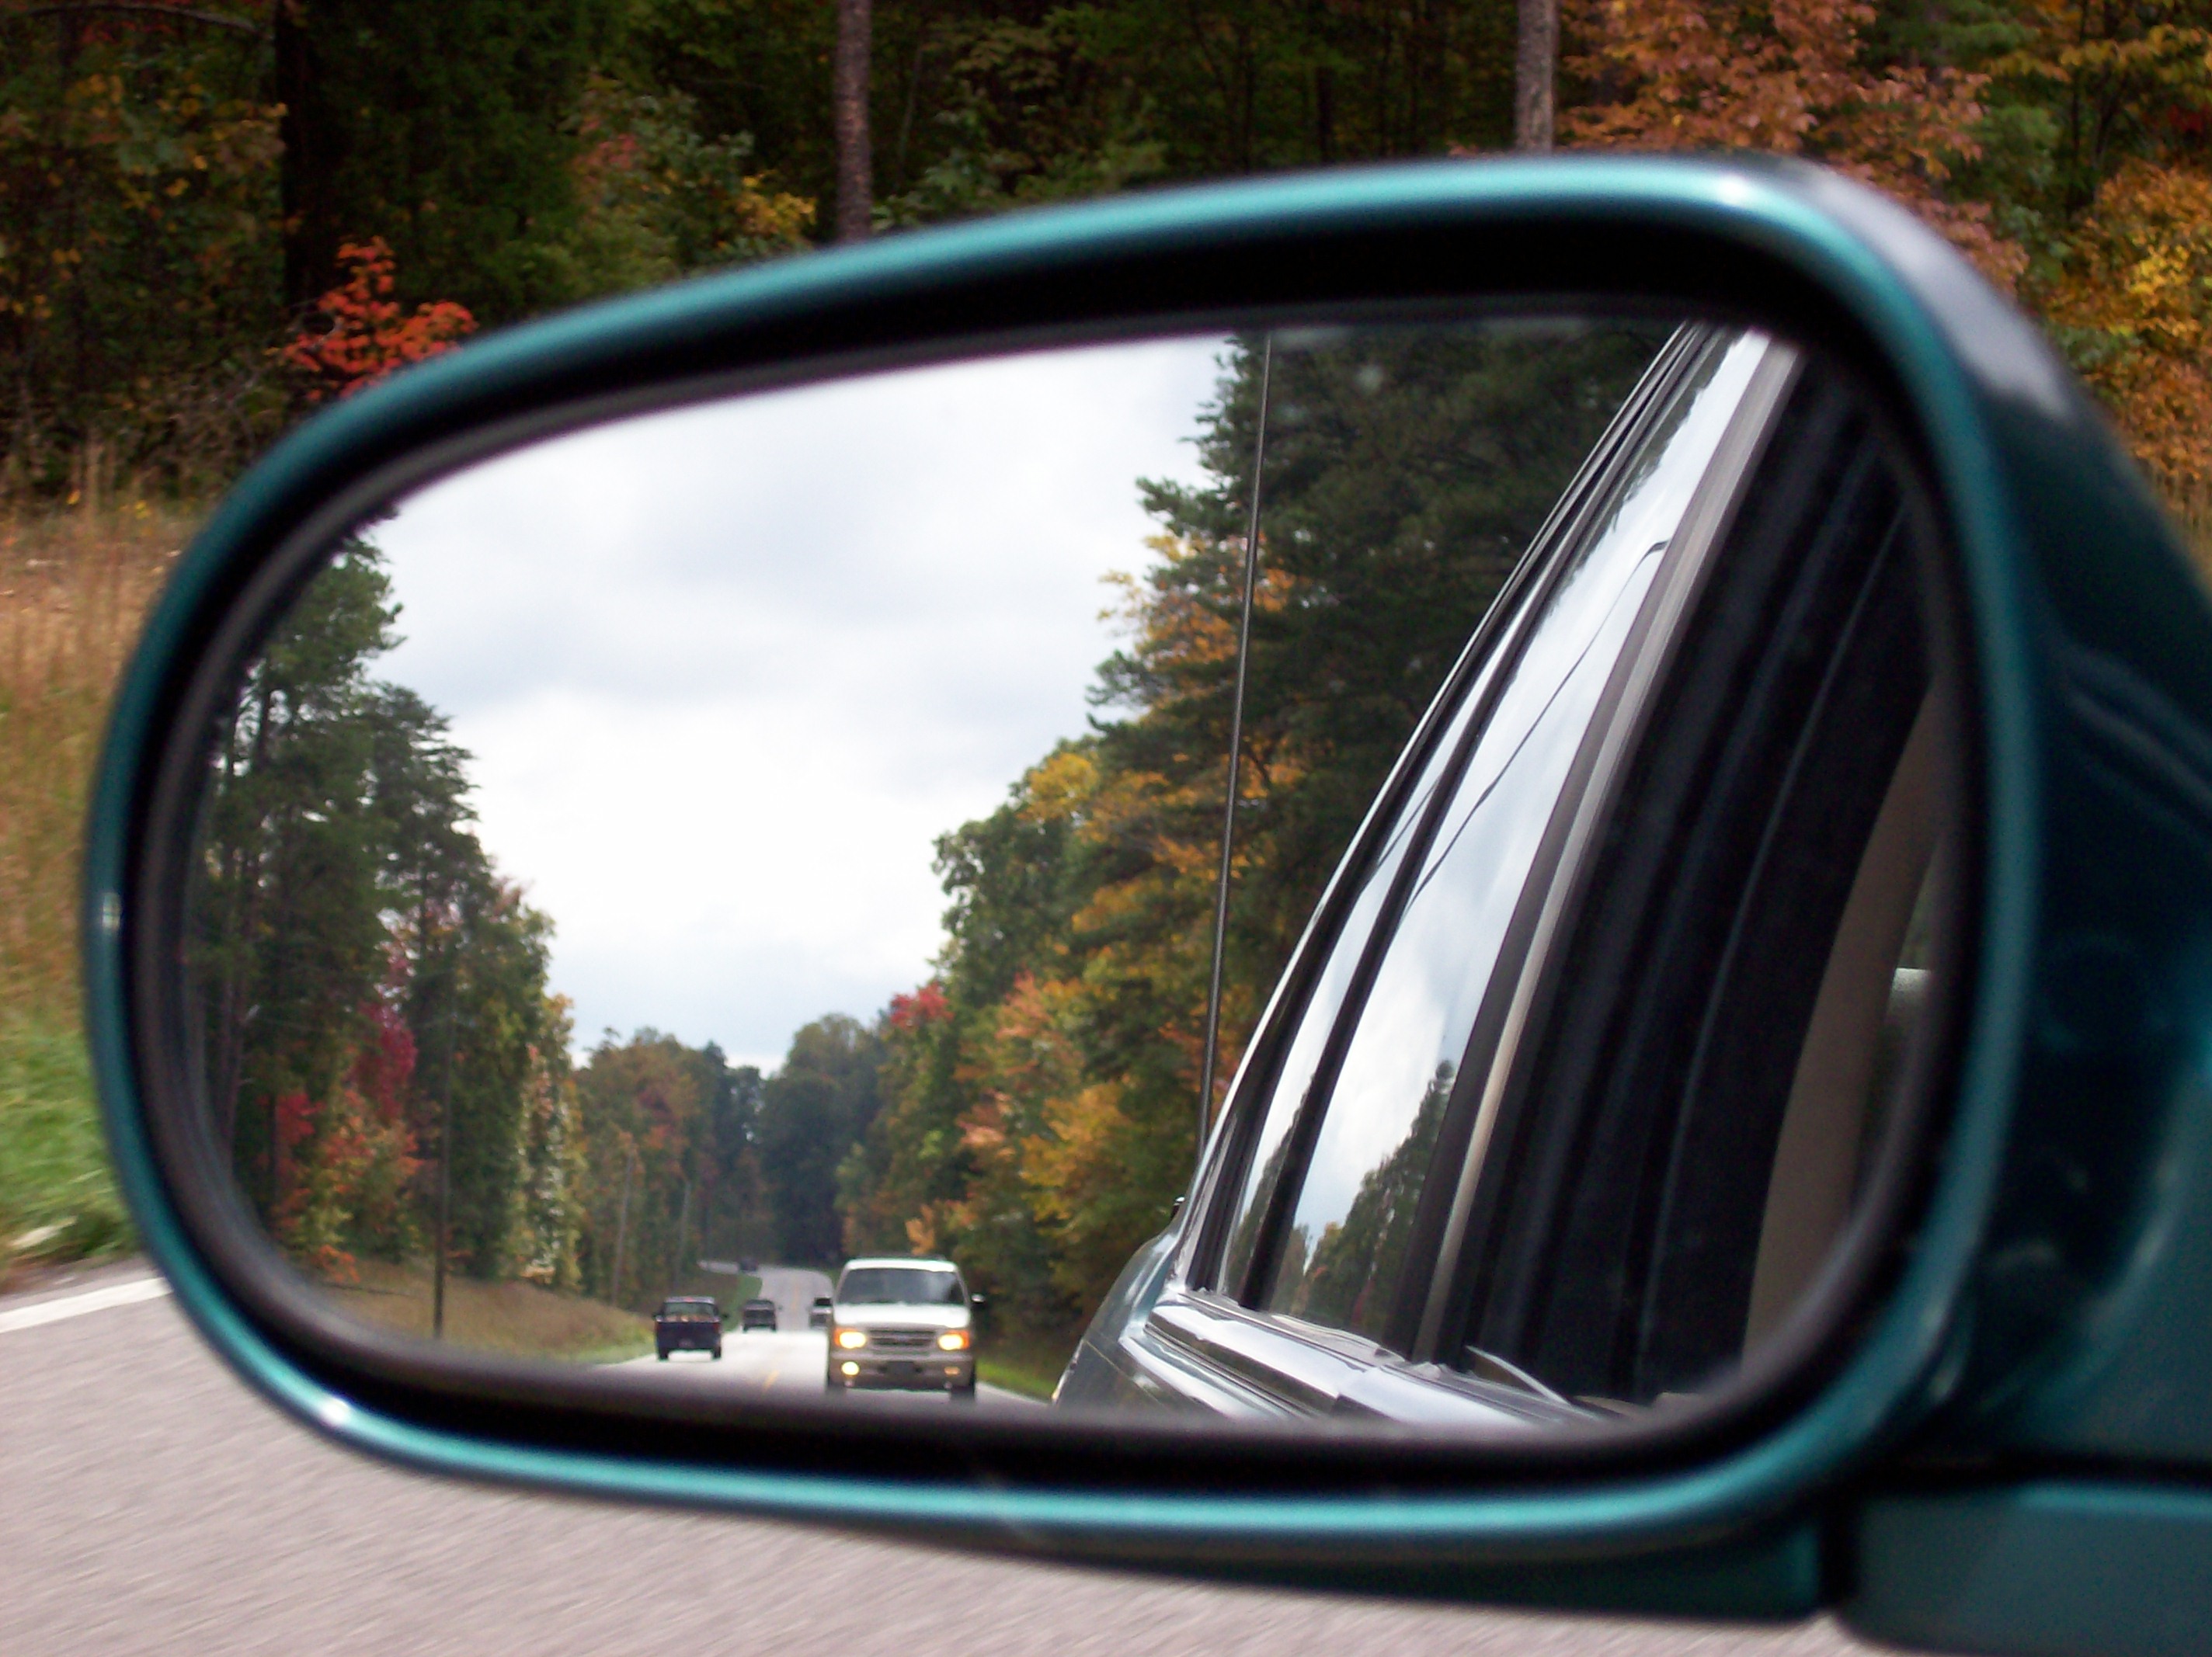 Get A Jump Start On Fall with these 3 Quick Car Care Tips